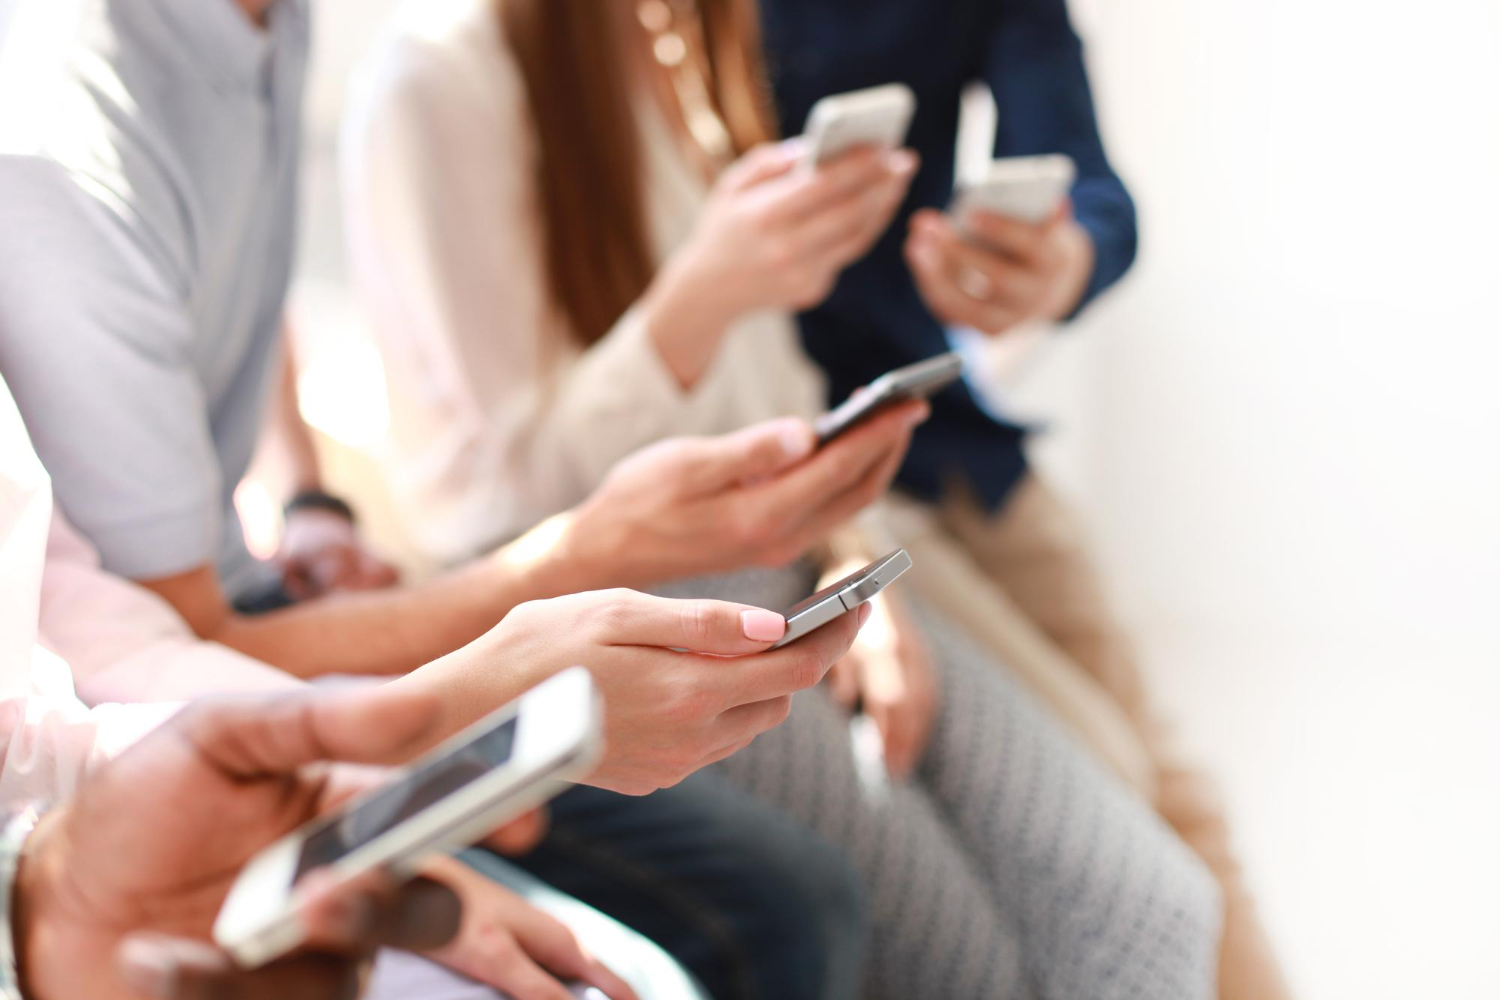 5 Text Messaging Trends in 2022